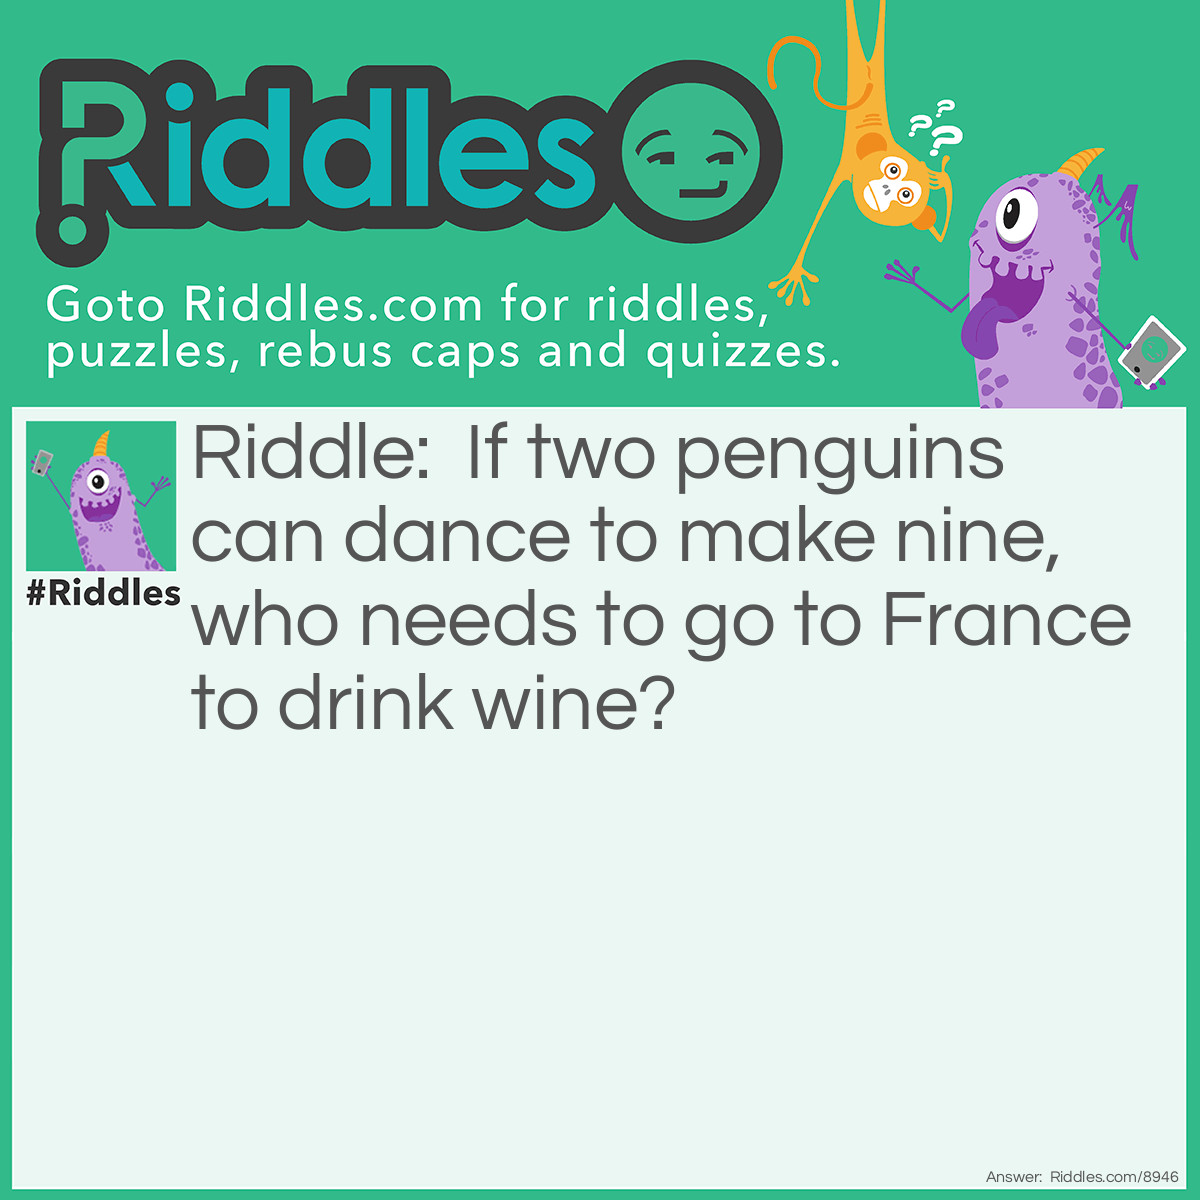 Riddle: If two penguins can dance to make nine, who needs to go to France to drink wine? Answer: Me.